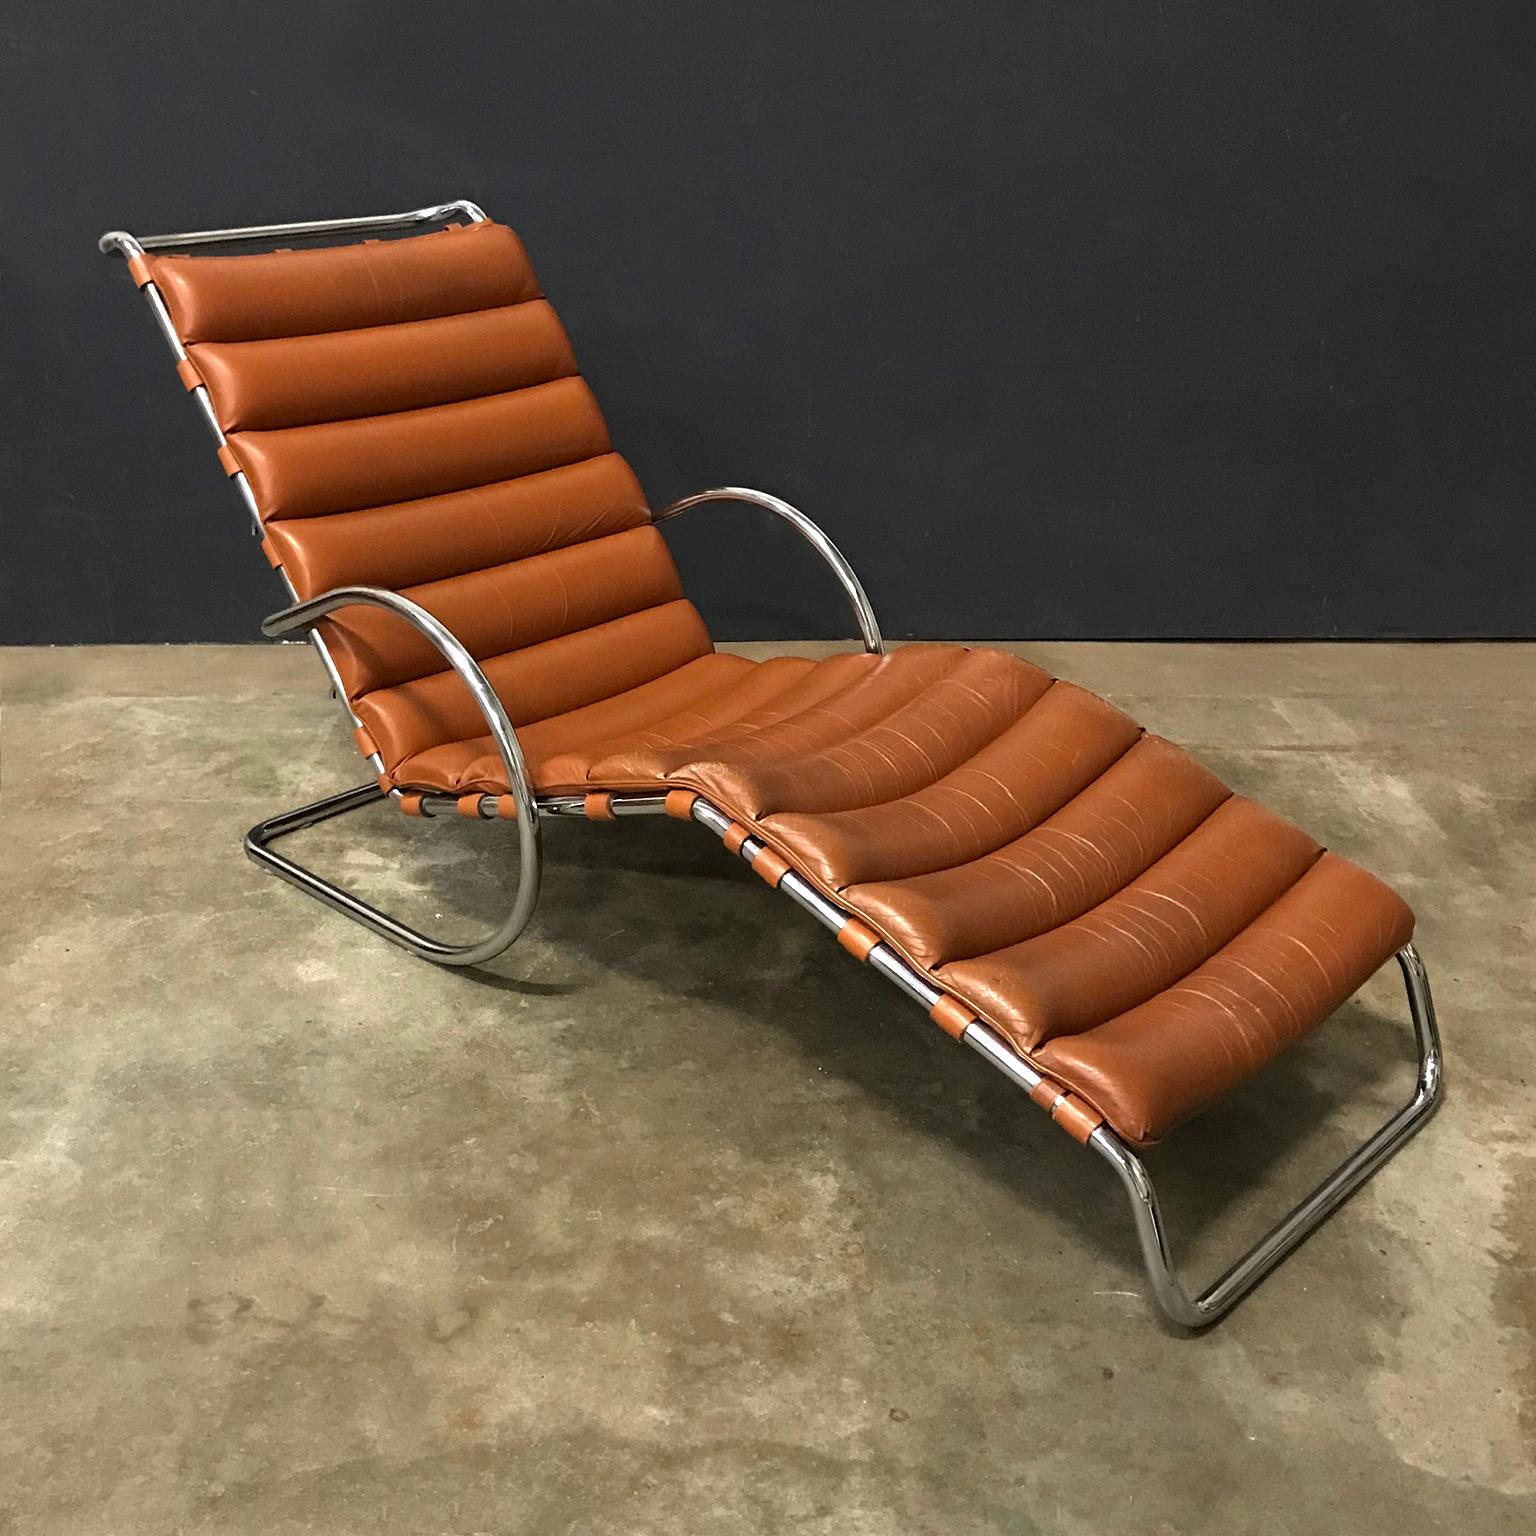 Rare early production beautiful chrome chaise longues with adjustable height. The history from the chair is it is bought from a former Knoll dealer in the Netherlands. The height of this chaise longues is adjustable by hand in three positions (see